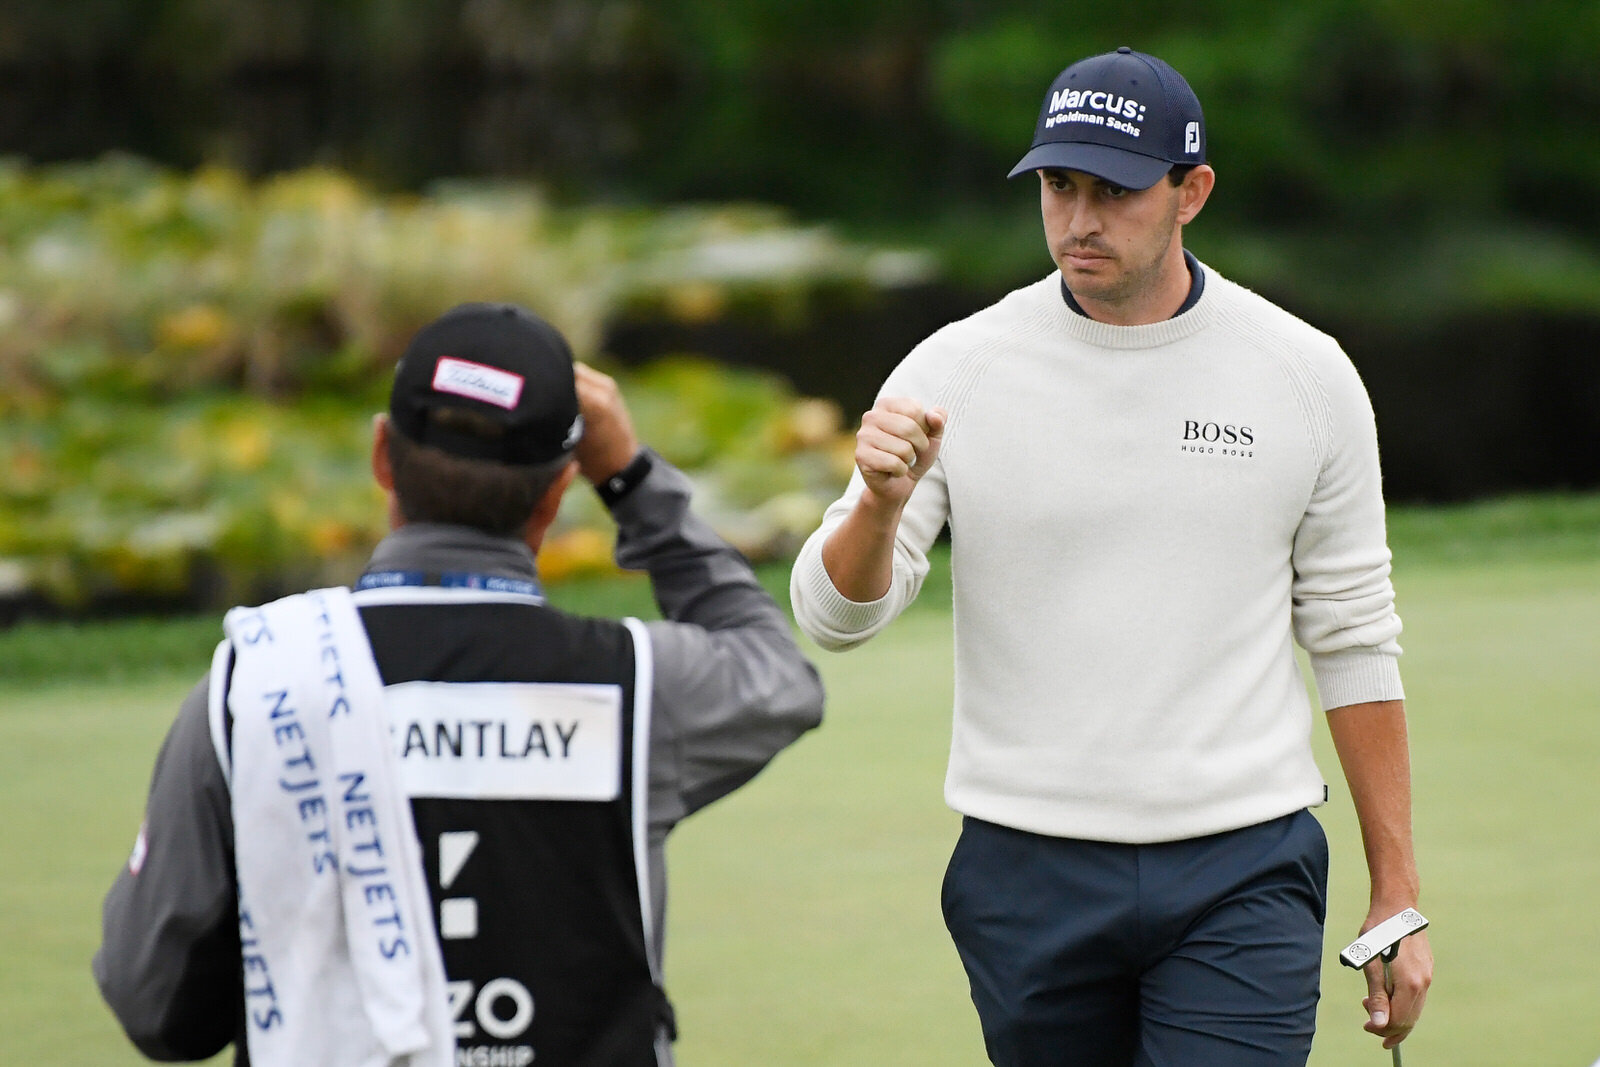  THOUSAND OAKS, CALIFORNIA - OCTOBER 25: Patrick Cantlay of the United States celebrates with his caddie Matt Minister after finishing on the 18th green during the final round of the Zozo Championship @ Sherwood on October 25, 2020 in Thousand Oaks, 